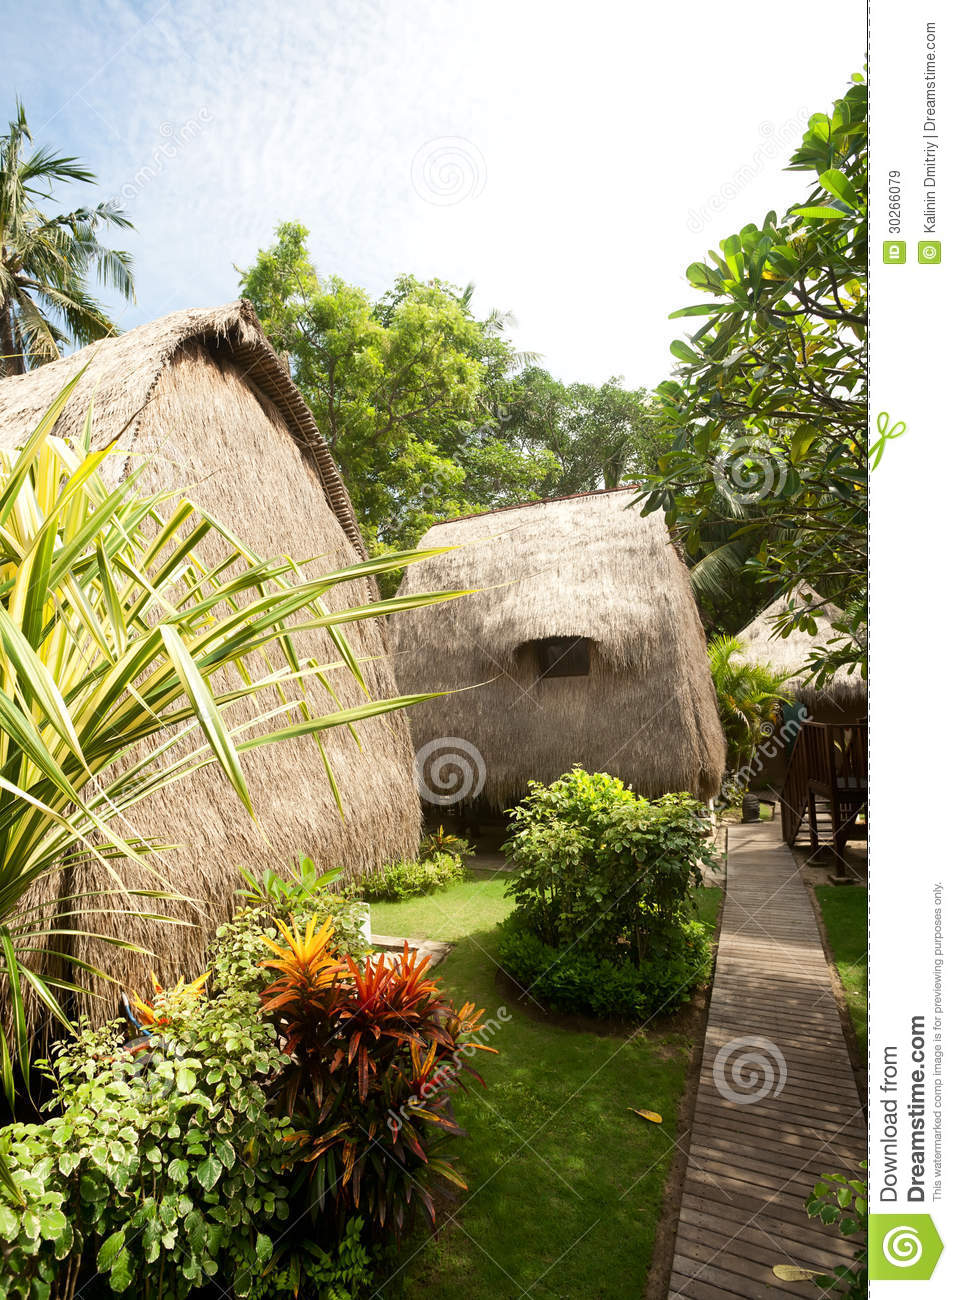 Thatch Roof Bungalow At Tropical Resort Royalty Free Stock Images